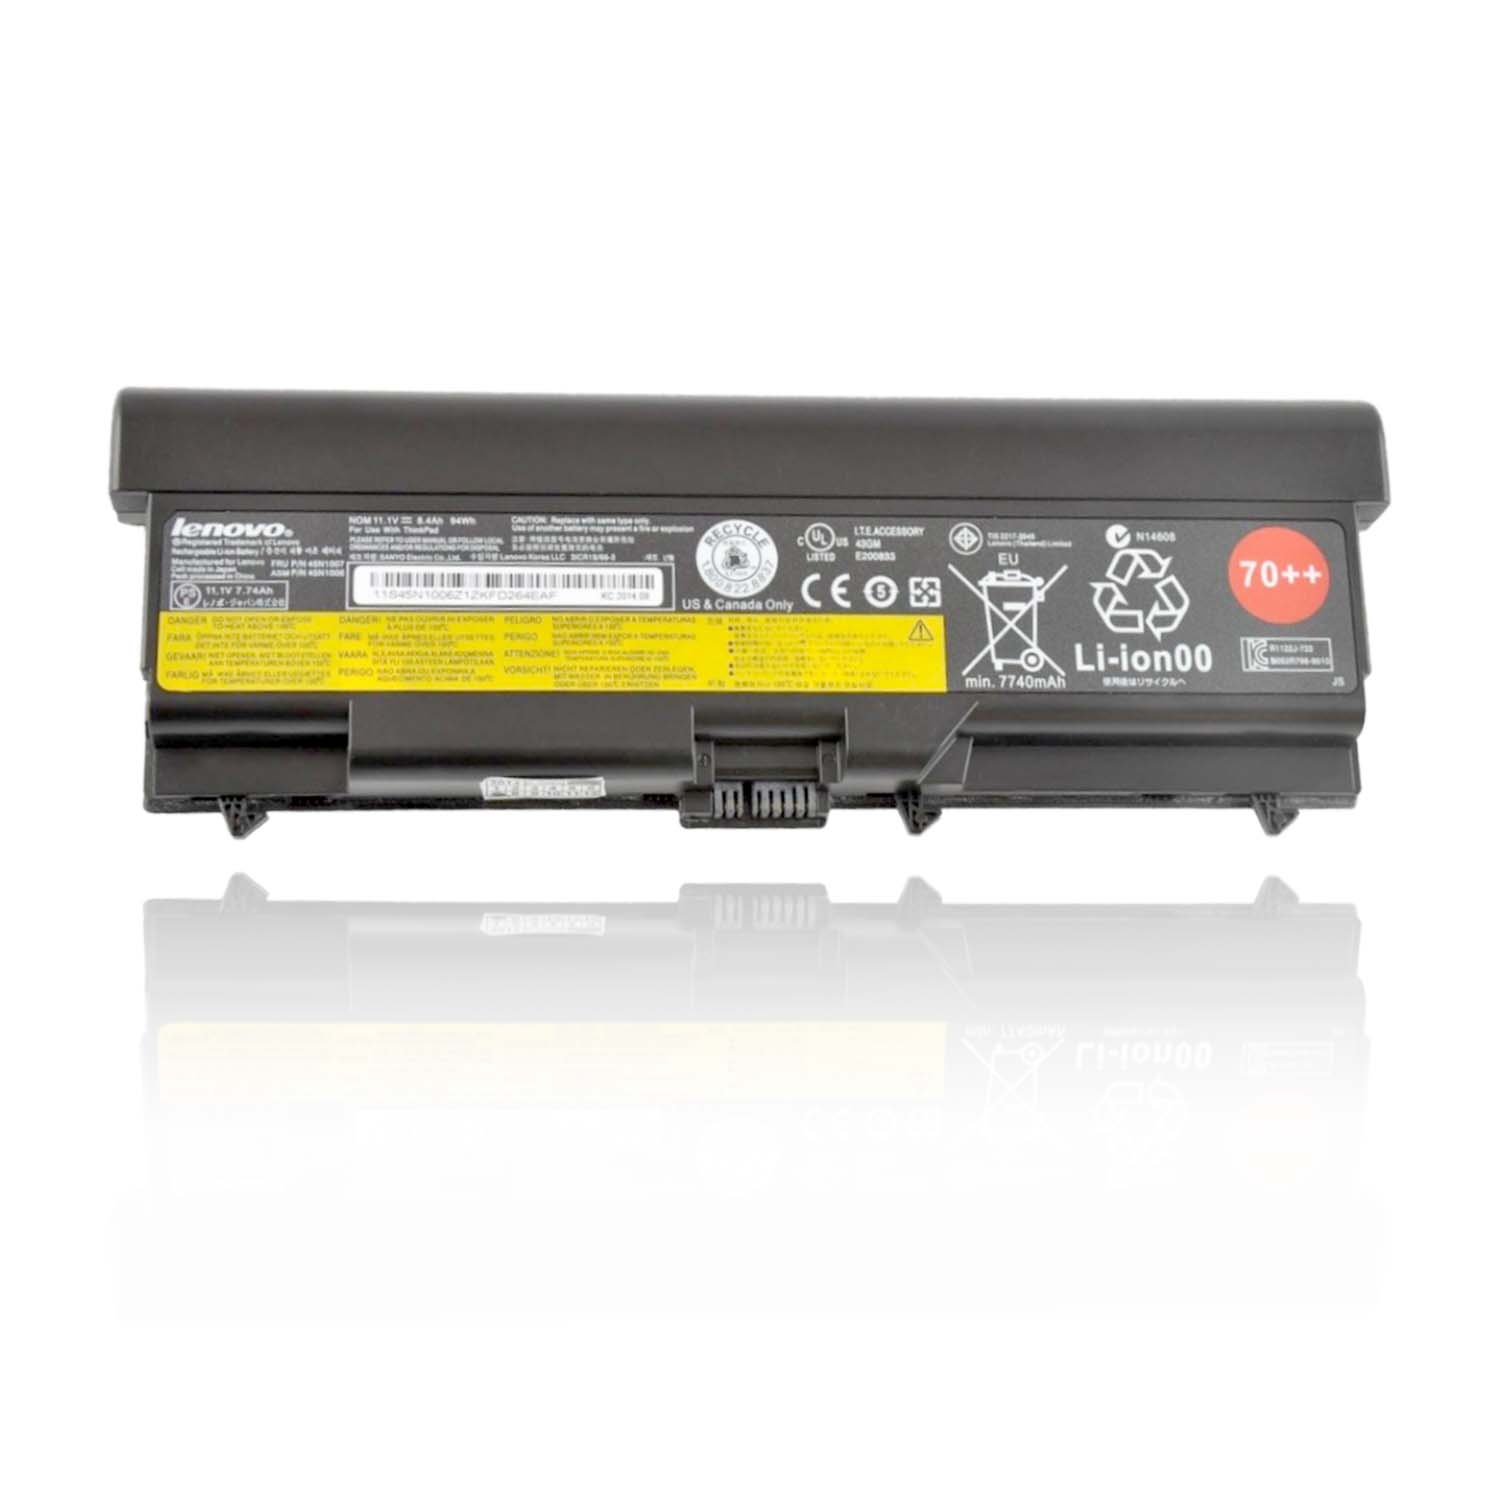 Lenovo SL410 T410 T420 T430 battery 0A36303 9 Cell Extended Life Thinkpad Battery 70++ 94Wh